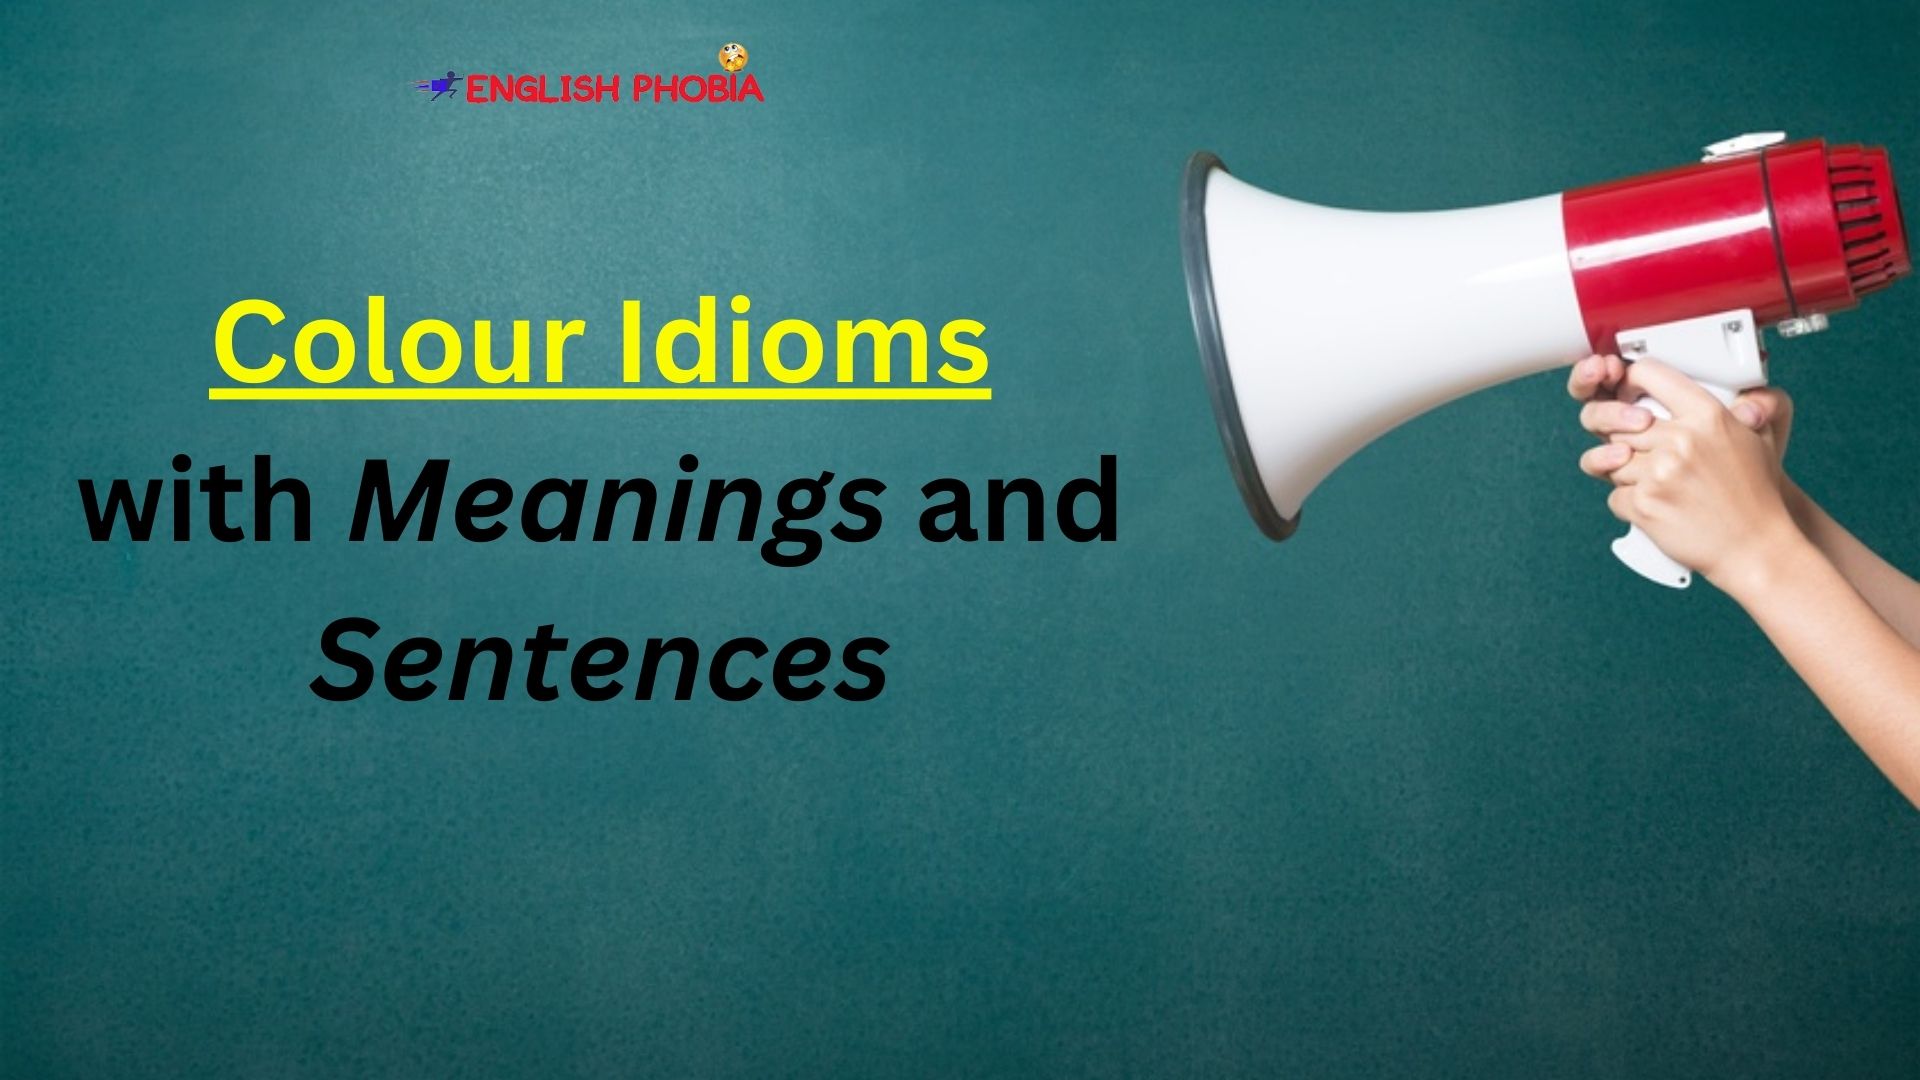 Colour Idioms, idioms related to colours, colour idioms with meanings and sentences